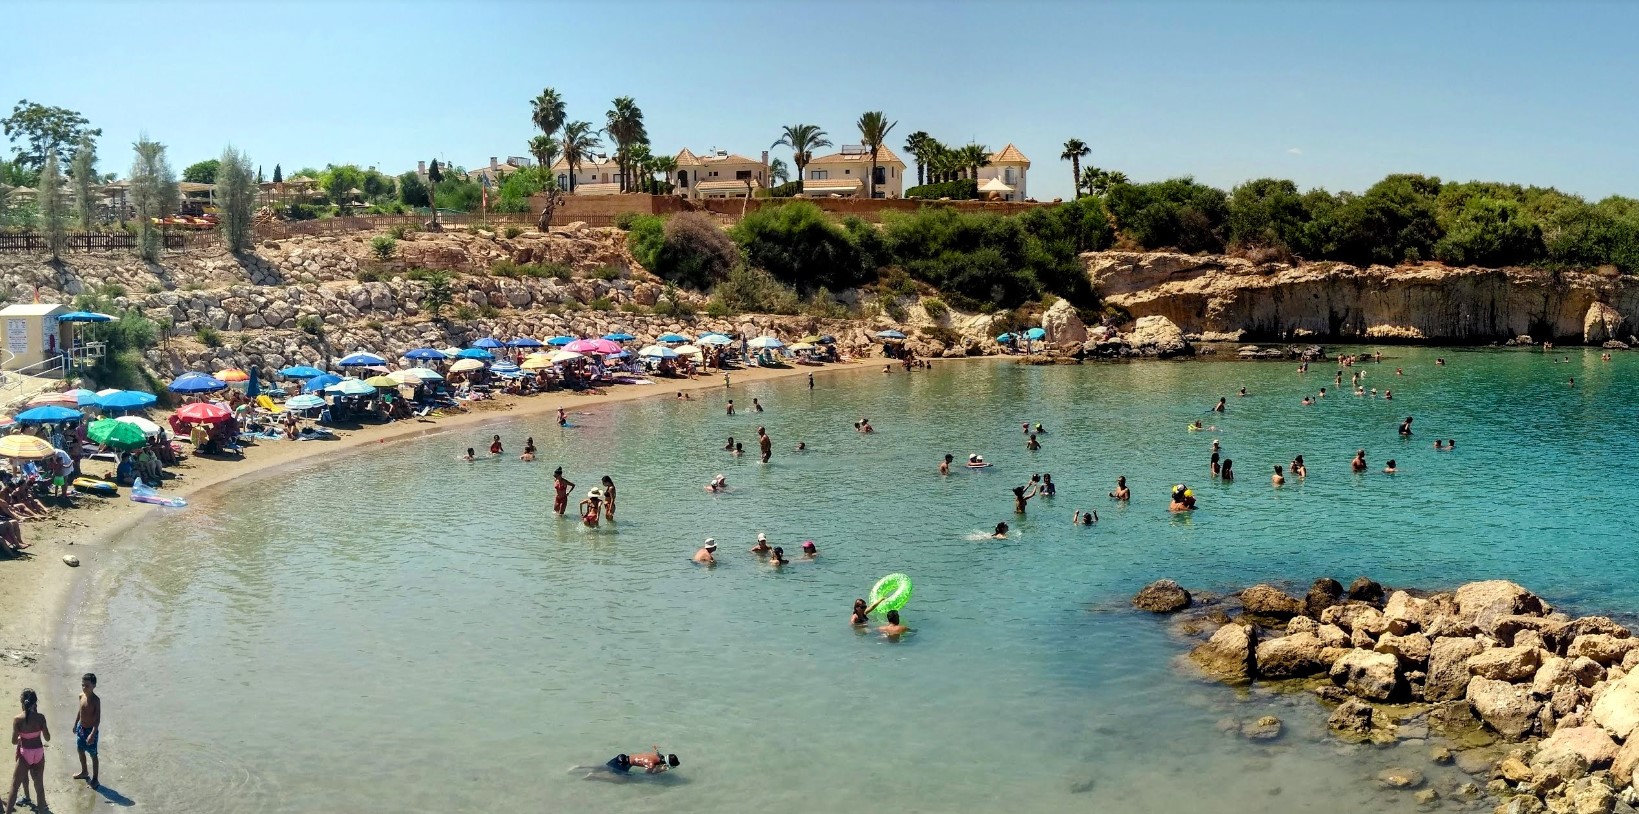 Minister calls for cautious commentary when discussing Cyprus tourism